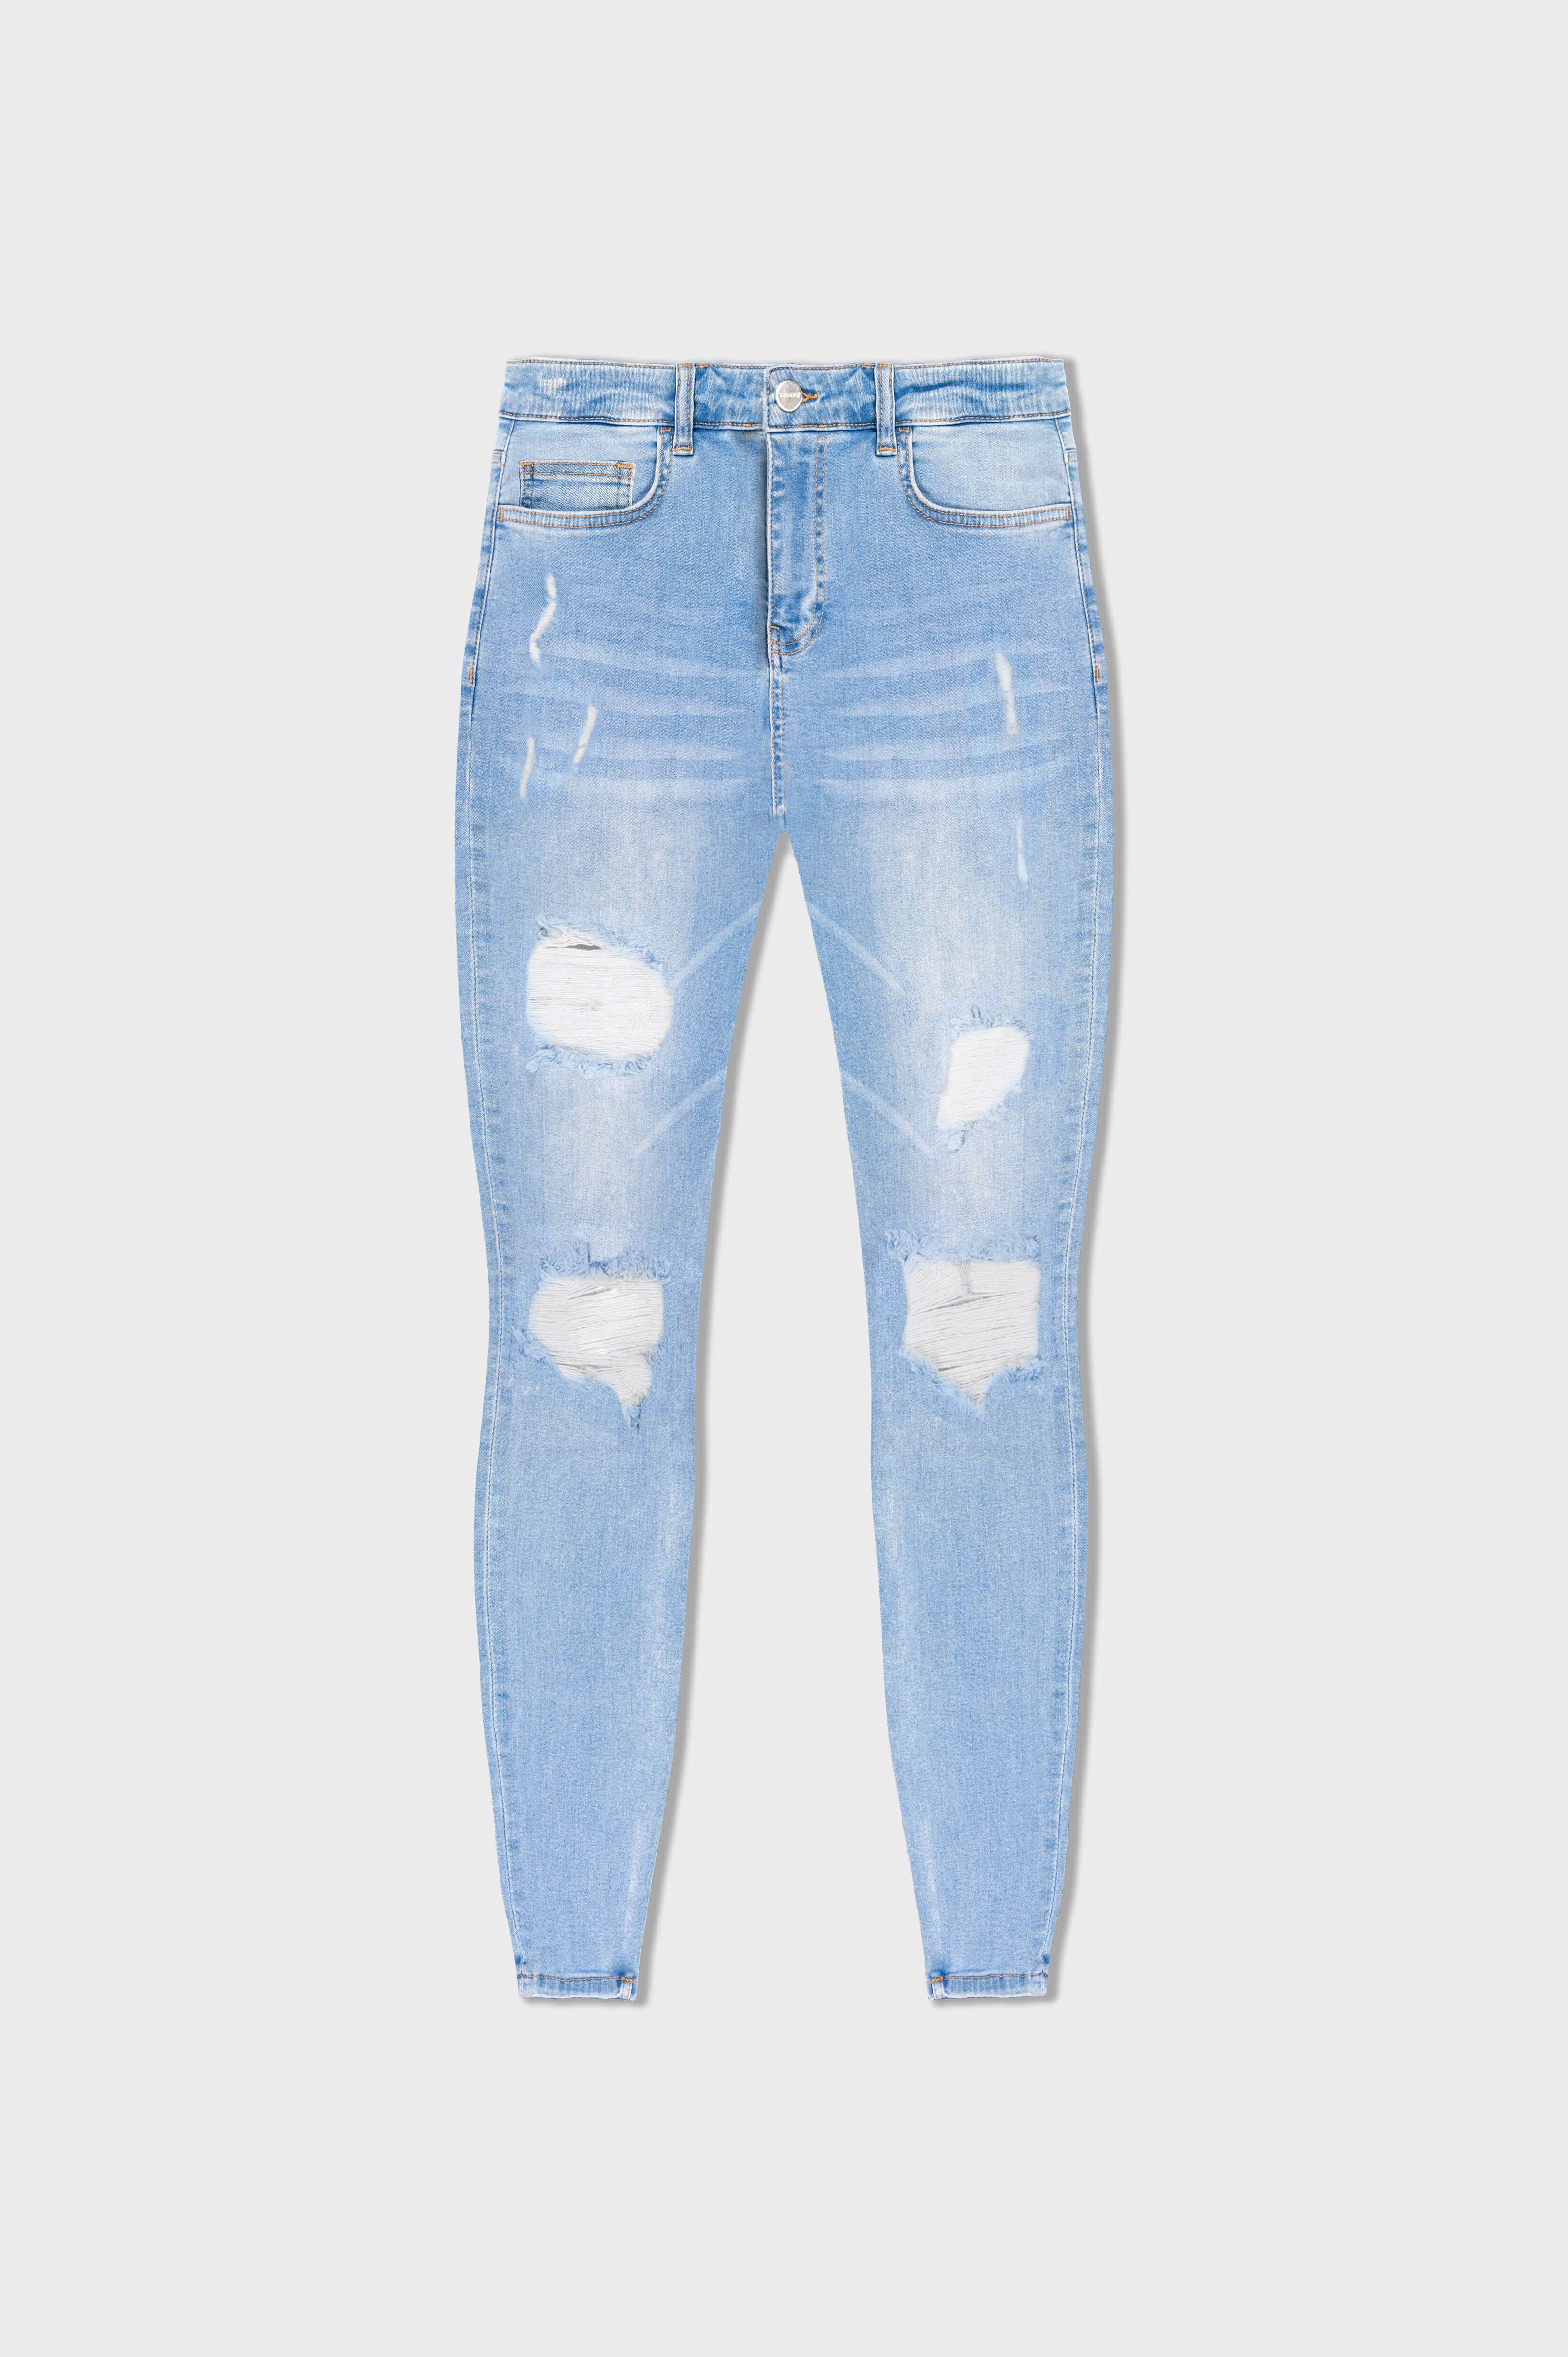 Legend London Jeans - spray on LIGHT BLUE JEANS - RIPPED AND REPAIRED